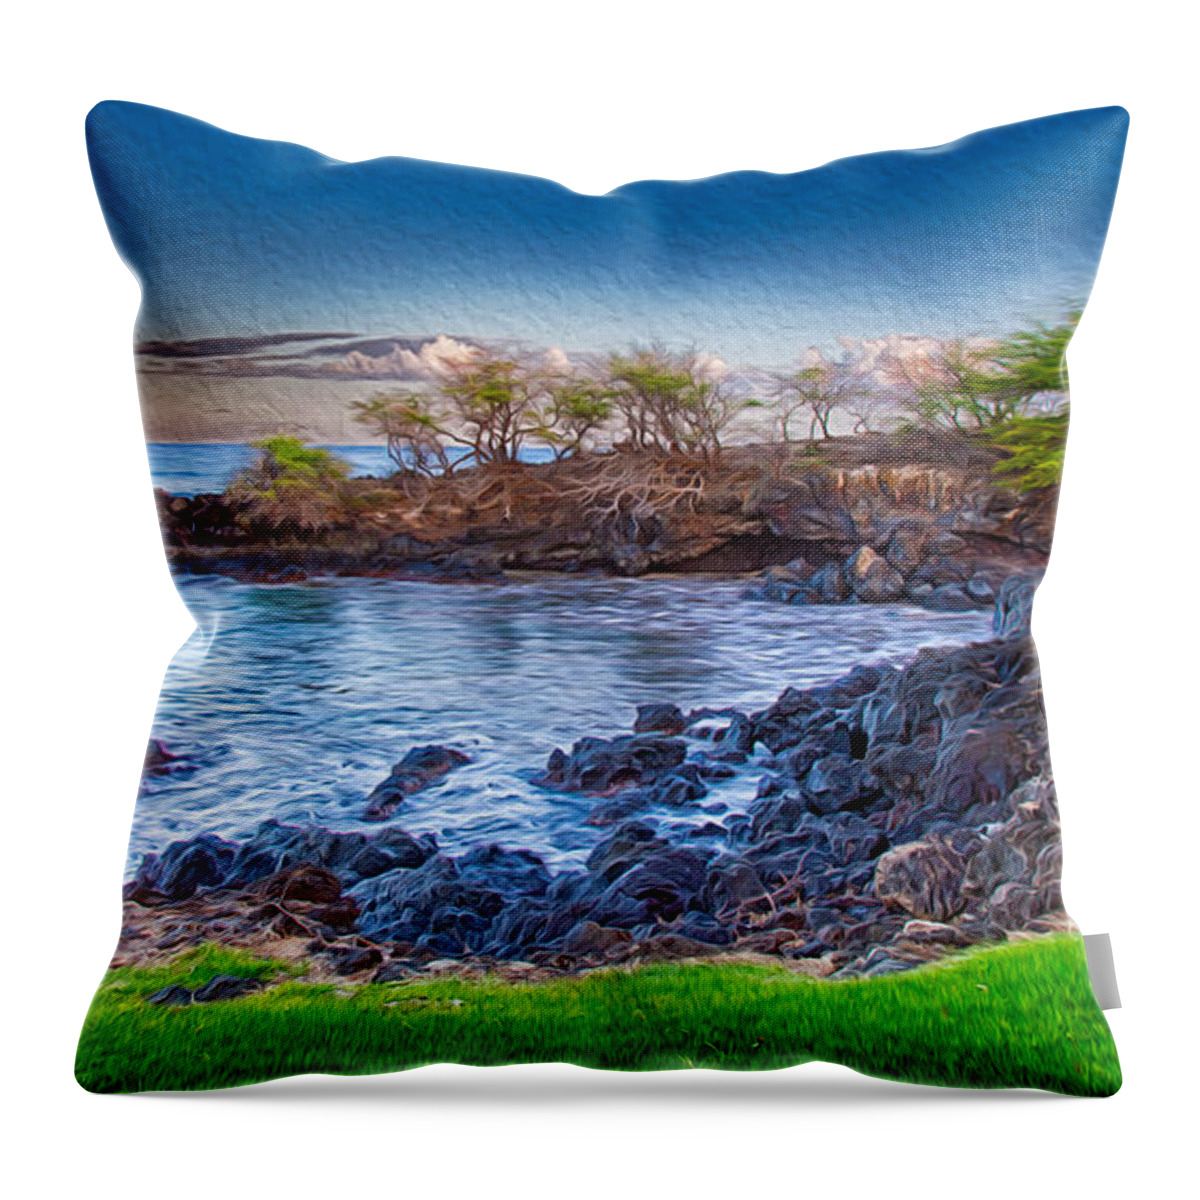 Abstract Throw Pillow featuring the painting Bayside Beauty by Omaste Witkowski